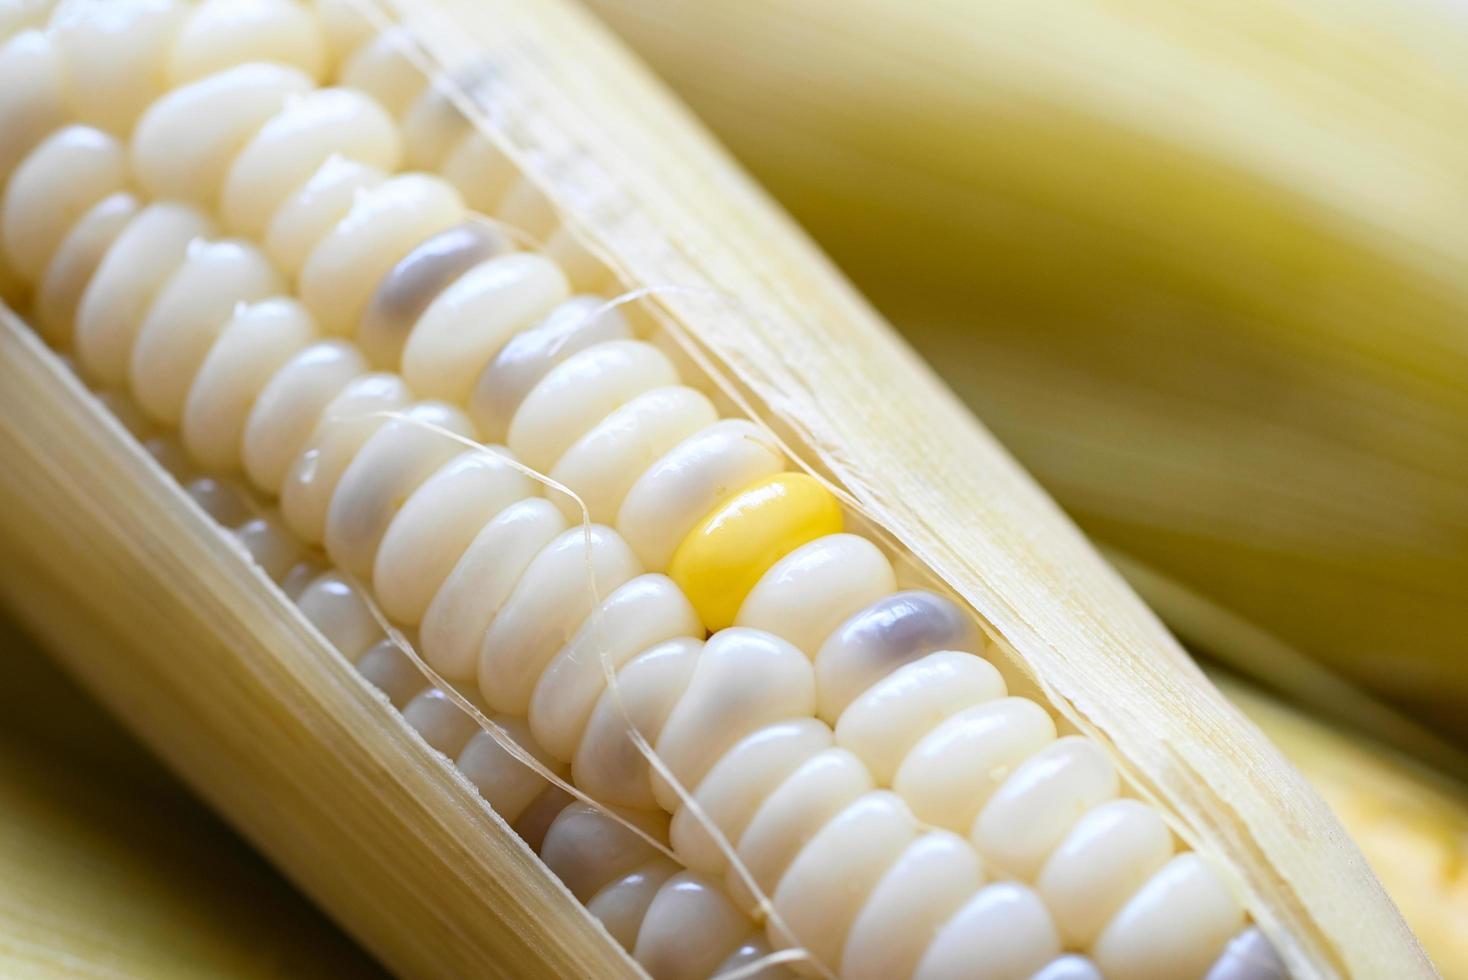 waxy corns or sweet corn cooked background, ripe corn cobs steamed or boiled for food vegan dinner or snack photo